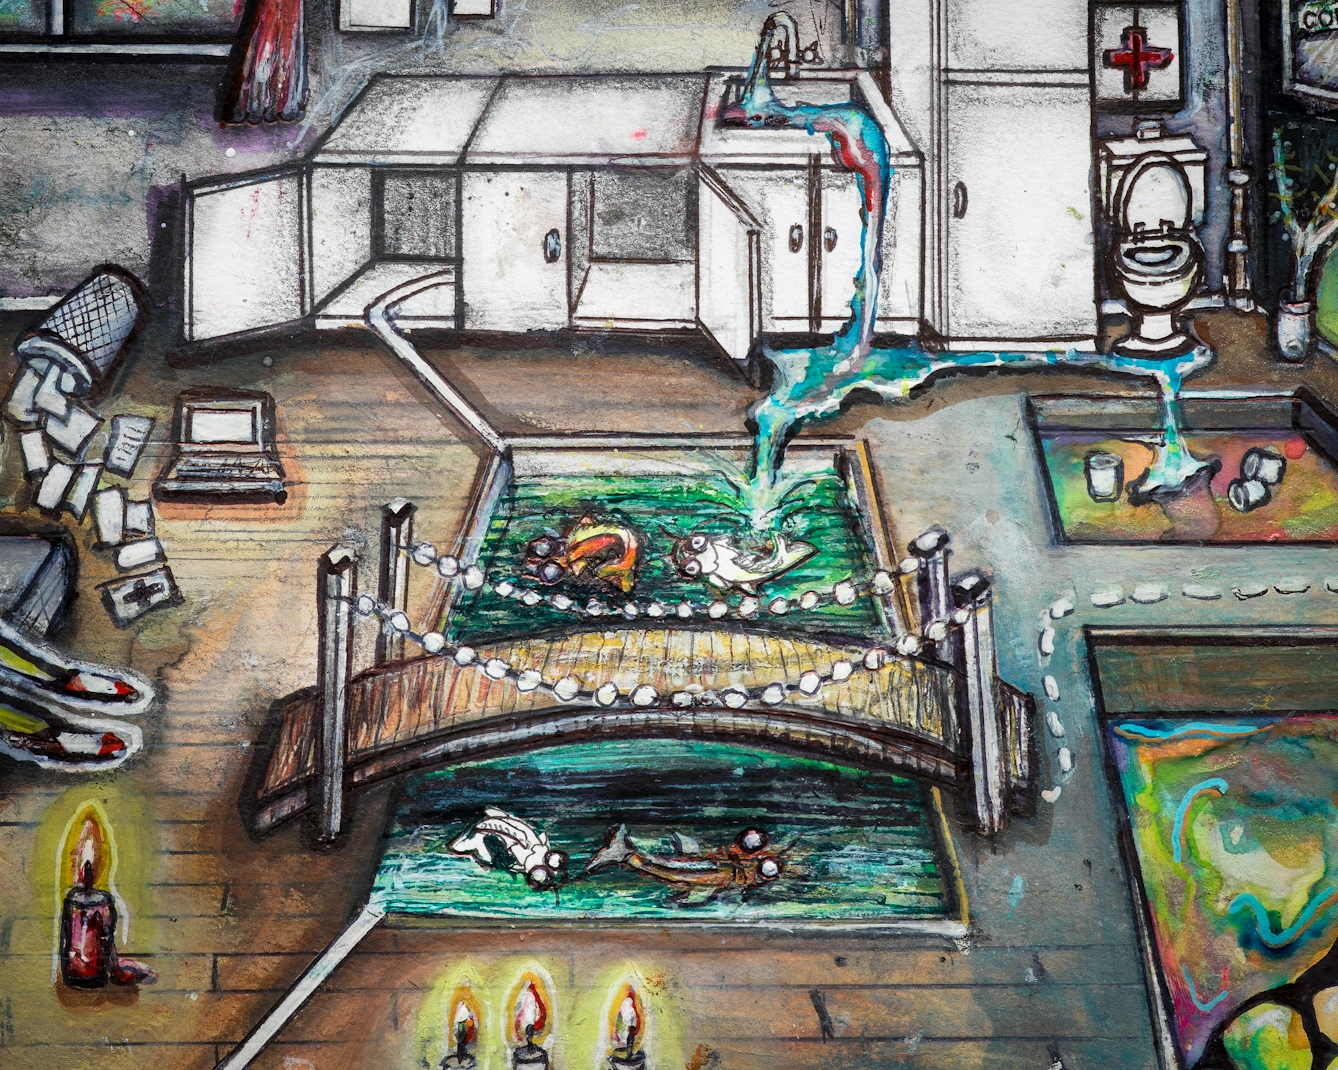 Artwork using watercolour and ink incorporating collaged words throughout the sArtwork using watercolour and ink incorporating collaged words throughout the scene. The artwork shows a busy household room with a kitchenette with an overflowing sink, a toilet and a first aid box in the background. In the foreground a lowered area in the floorboards provides a rectangular pond with fish, and a little bridge across it with string lights. Water from the overflowing sink pours into the pond. 